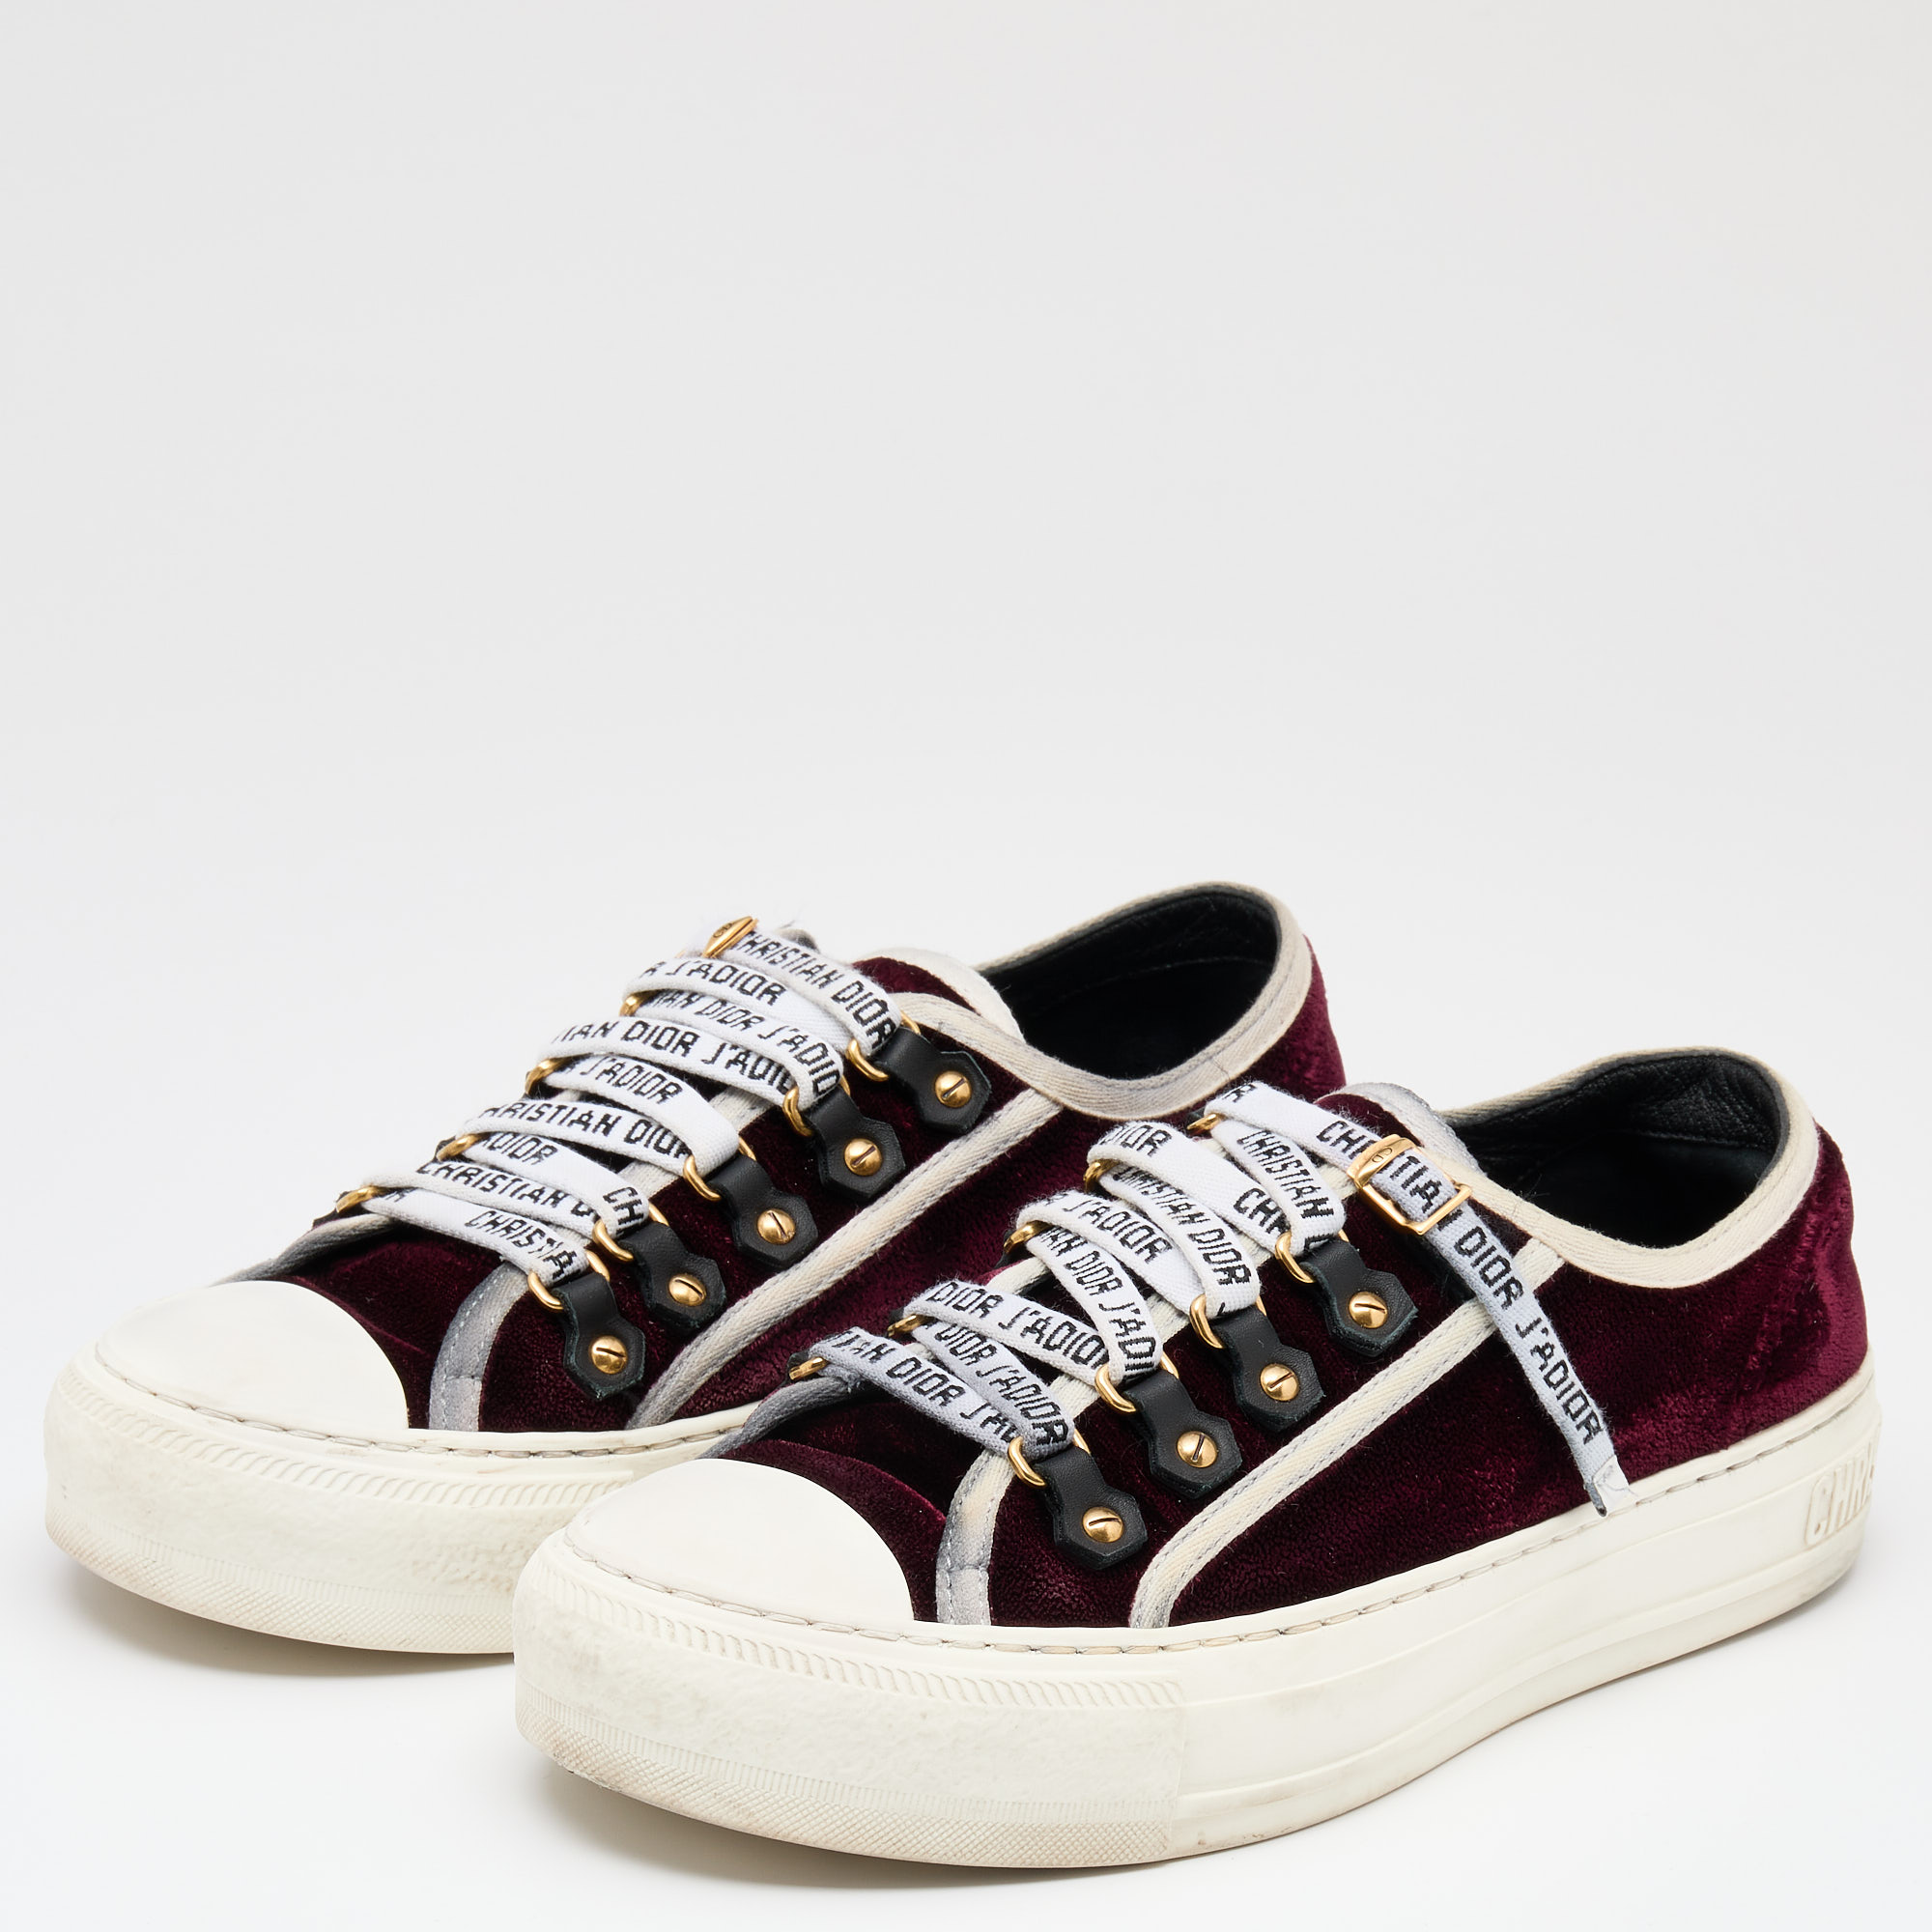 

Dior Burgundy Velvet And Canvas Trim Walk'N'Dior Low Top Sneakers Size